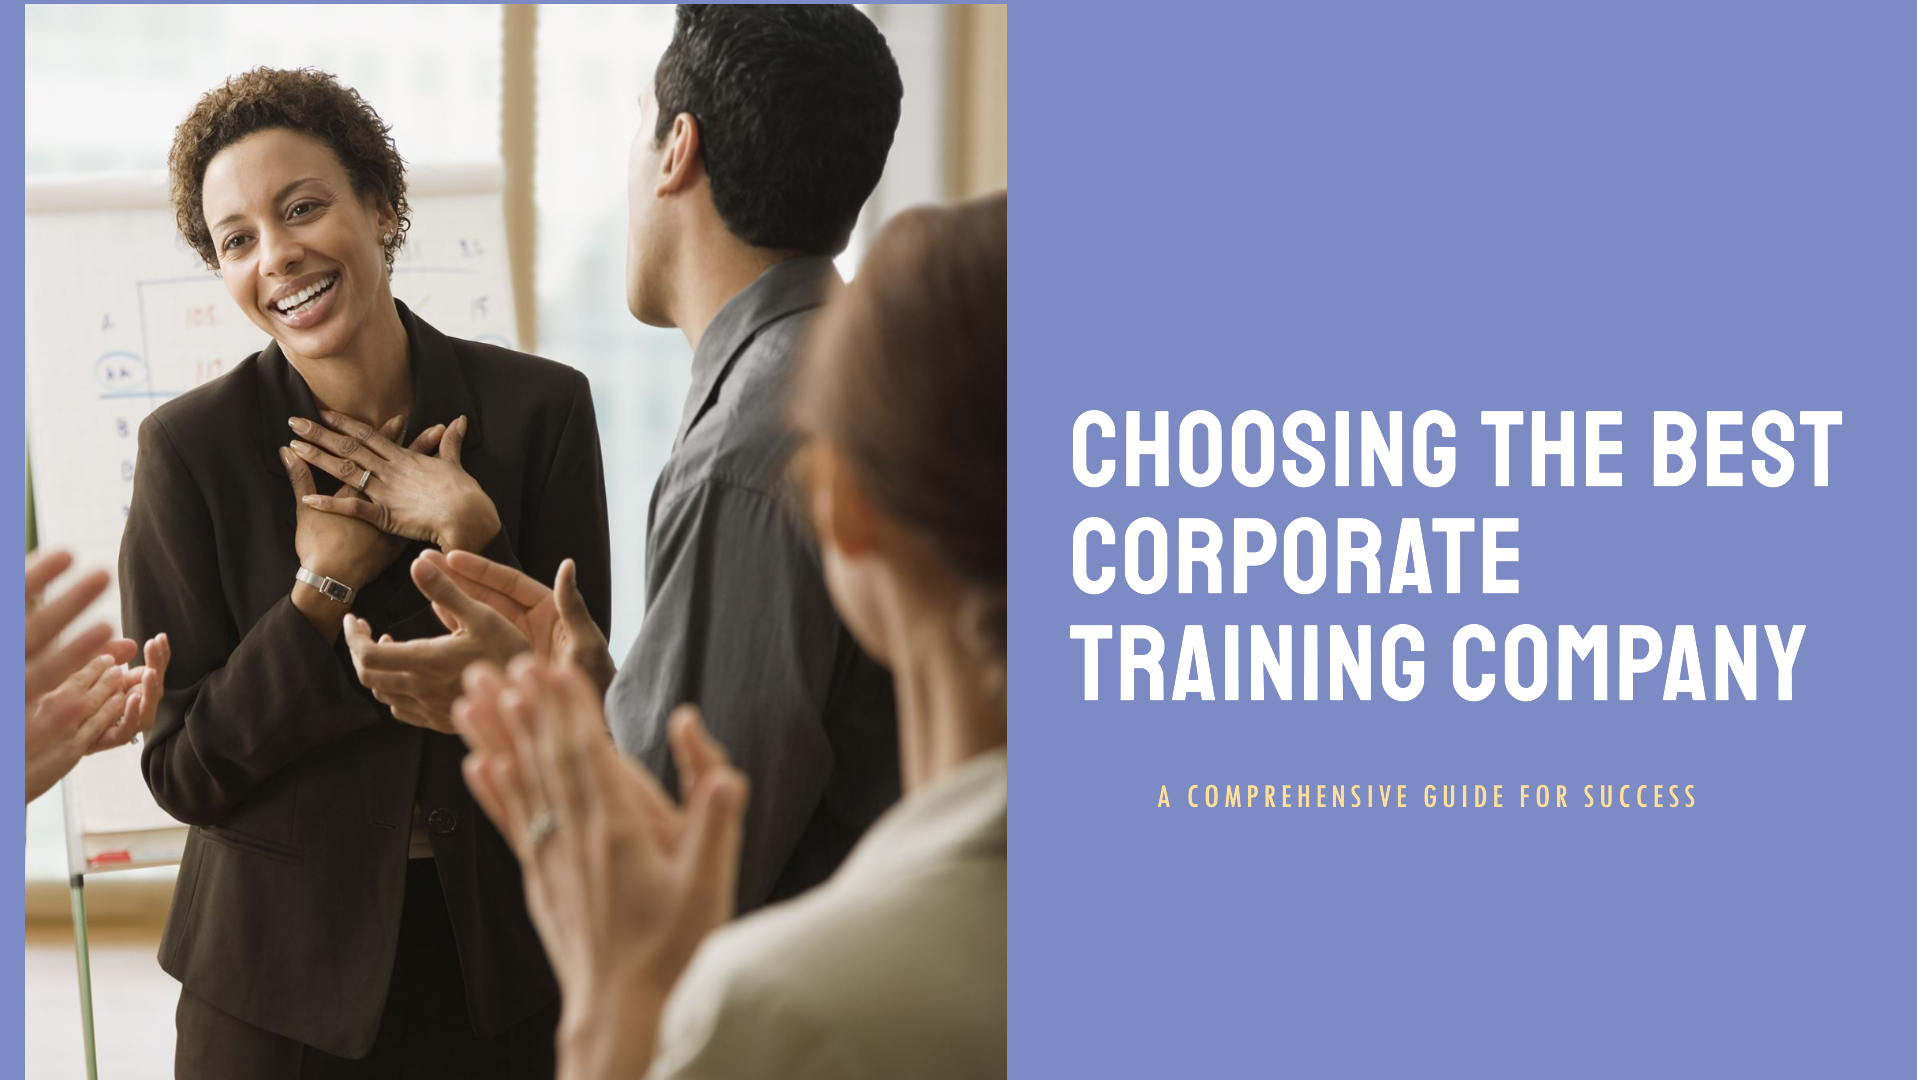 Choosing the Best Corporate Training Company: A Comprehensive Guide for Success